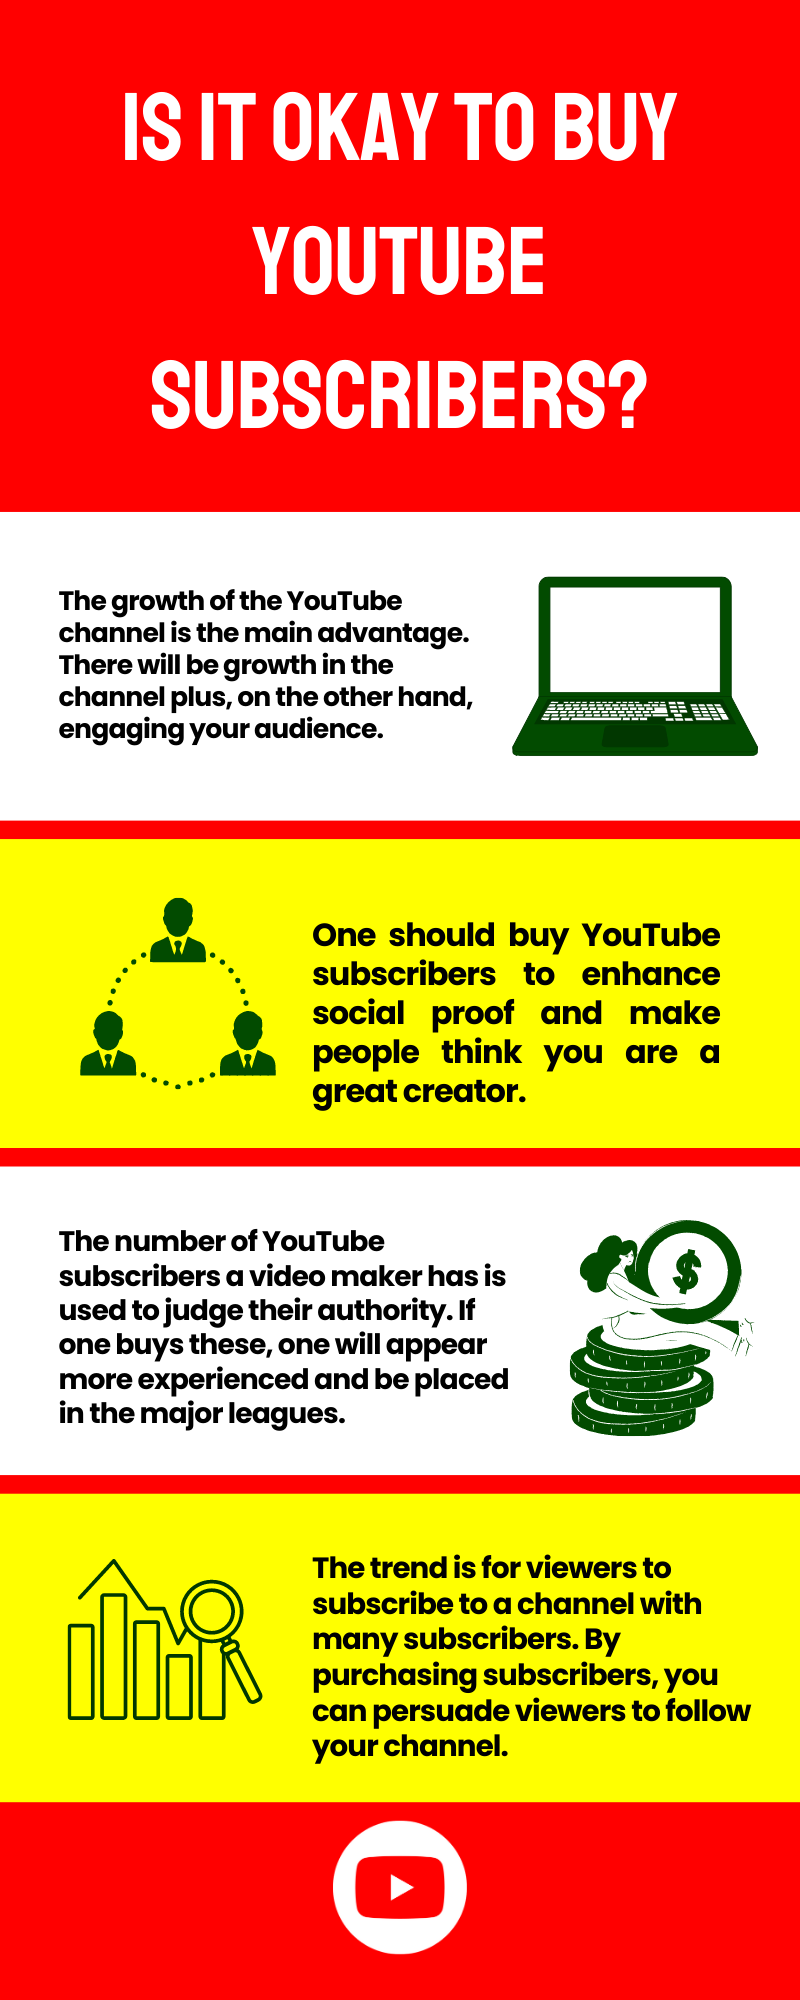 Benefits Of Buying YT Subscribers